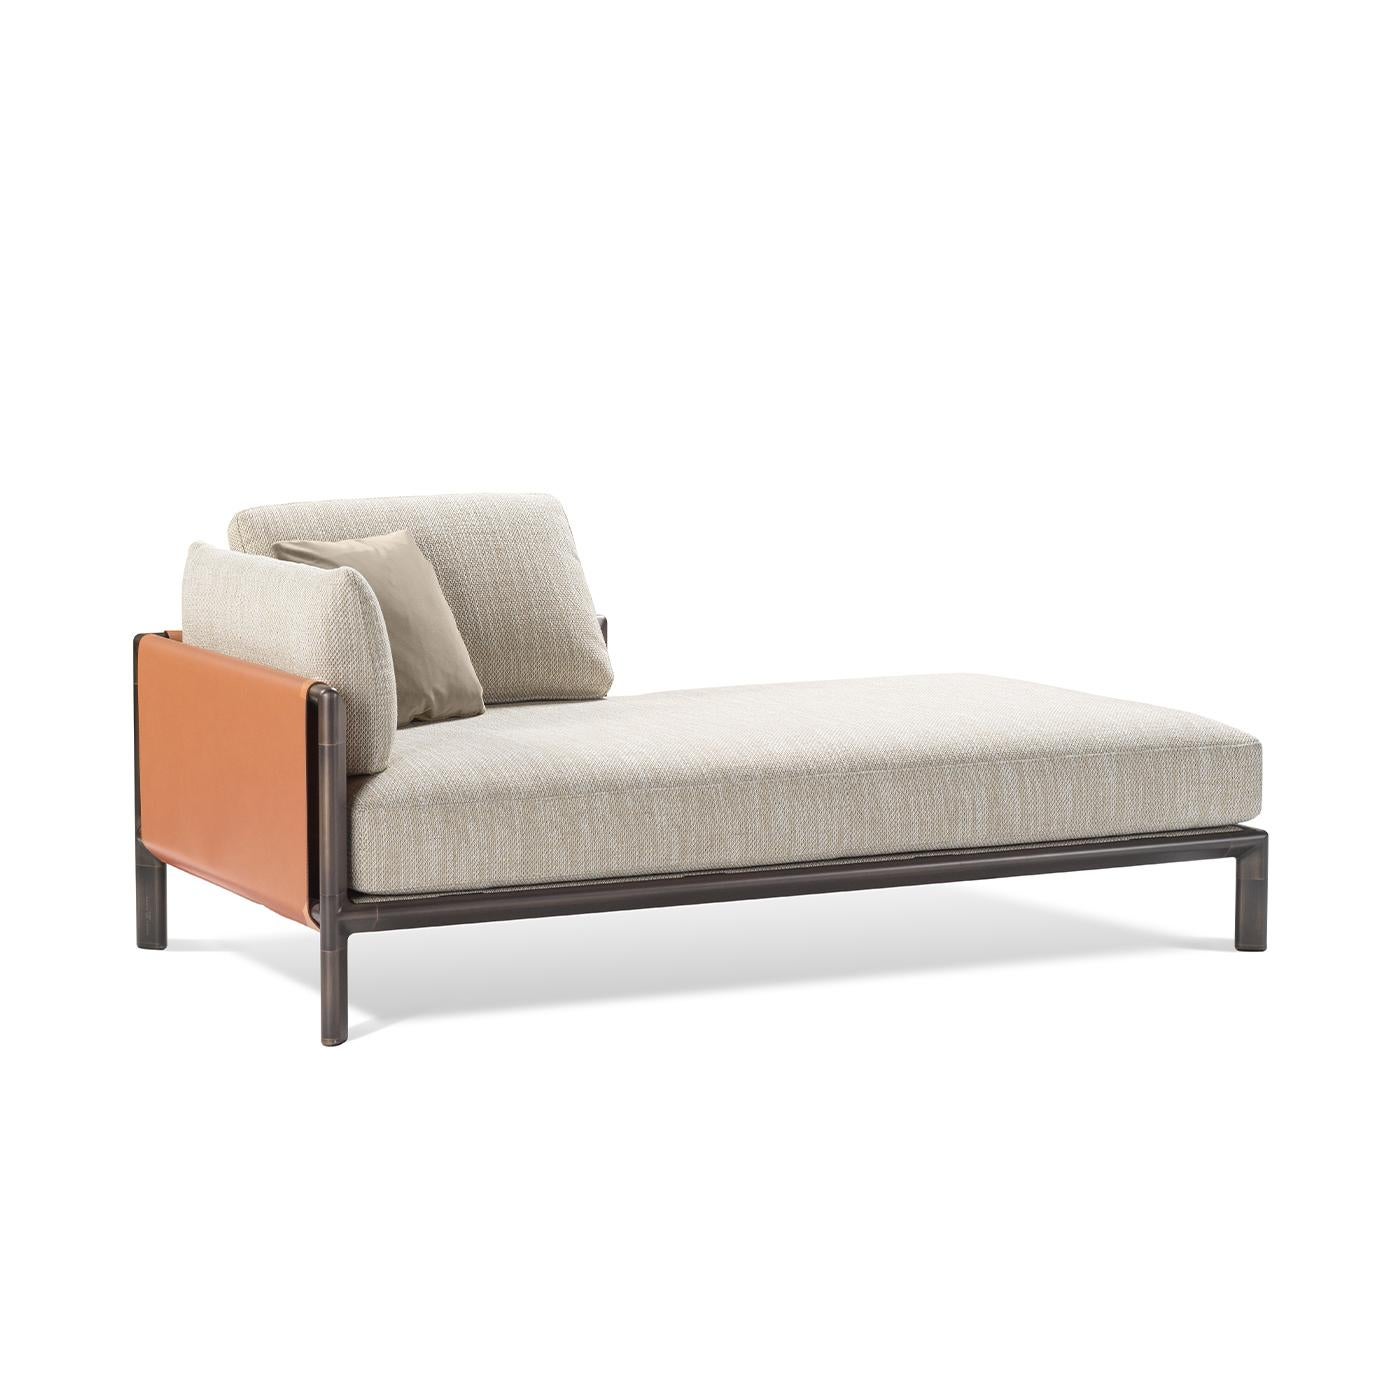 Part of the Frame series, this design represents the angular module of that design, here offered separately stressing its standalone potential as comfortable chaise longue for taking a break from an intense workday. The rigorous aluminum frame